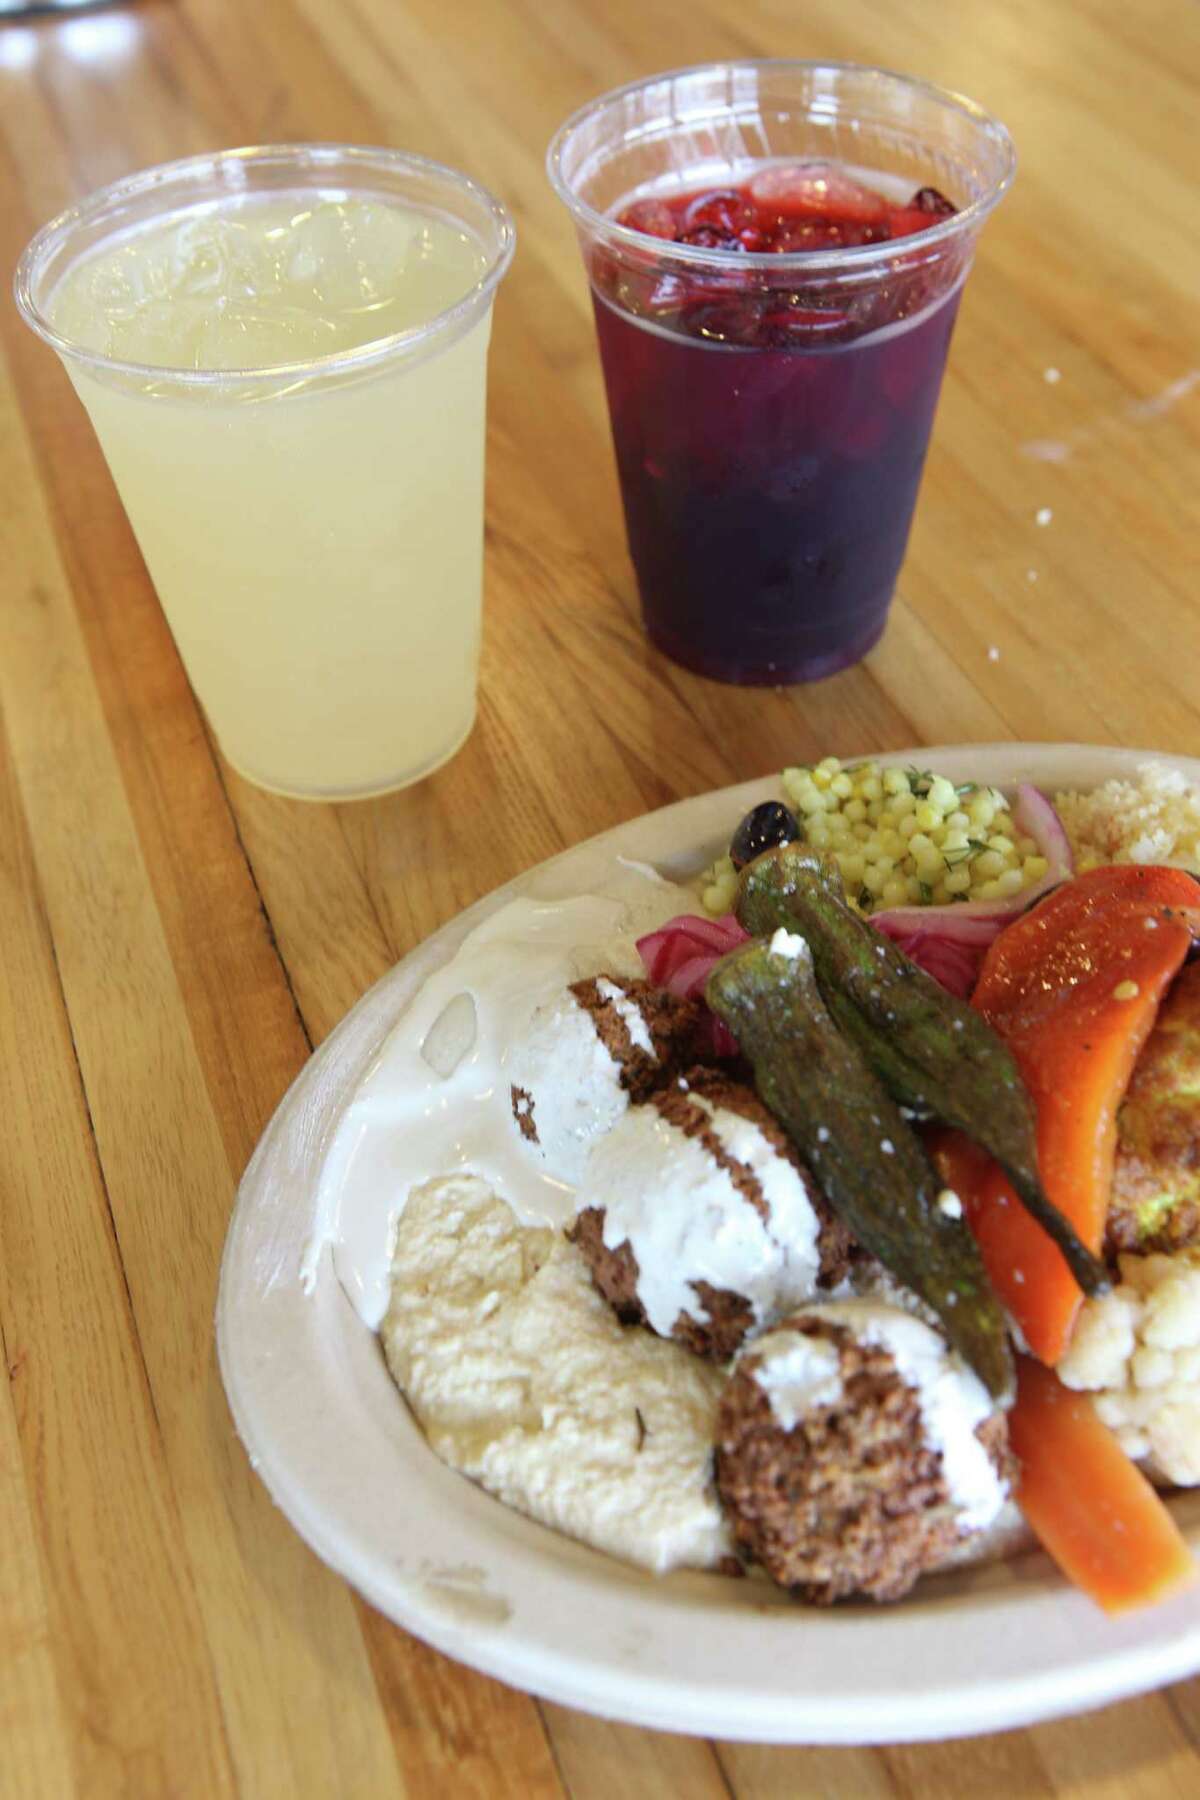 A falafel plate from Andrew Weissman's Moshe's Golden Falafel is seen with lemonade, left, and hibiscus tea in the background